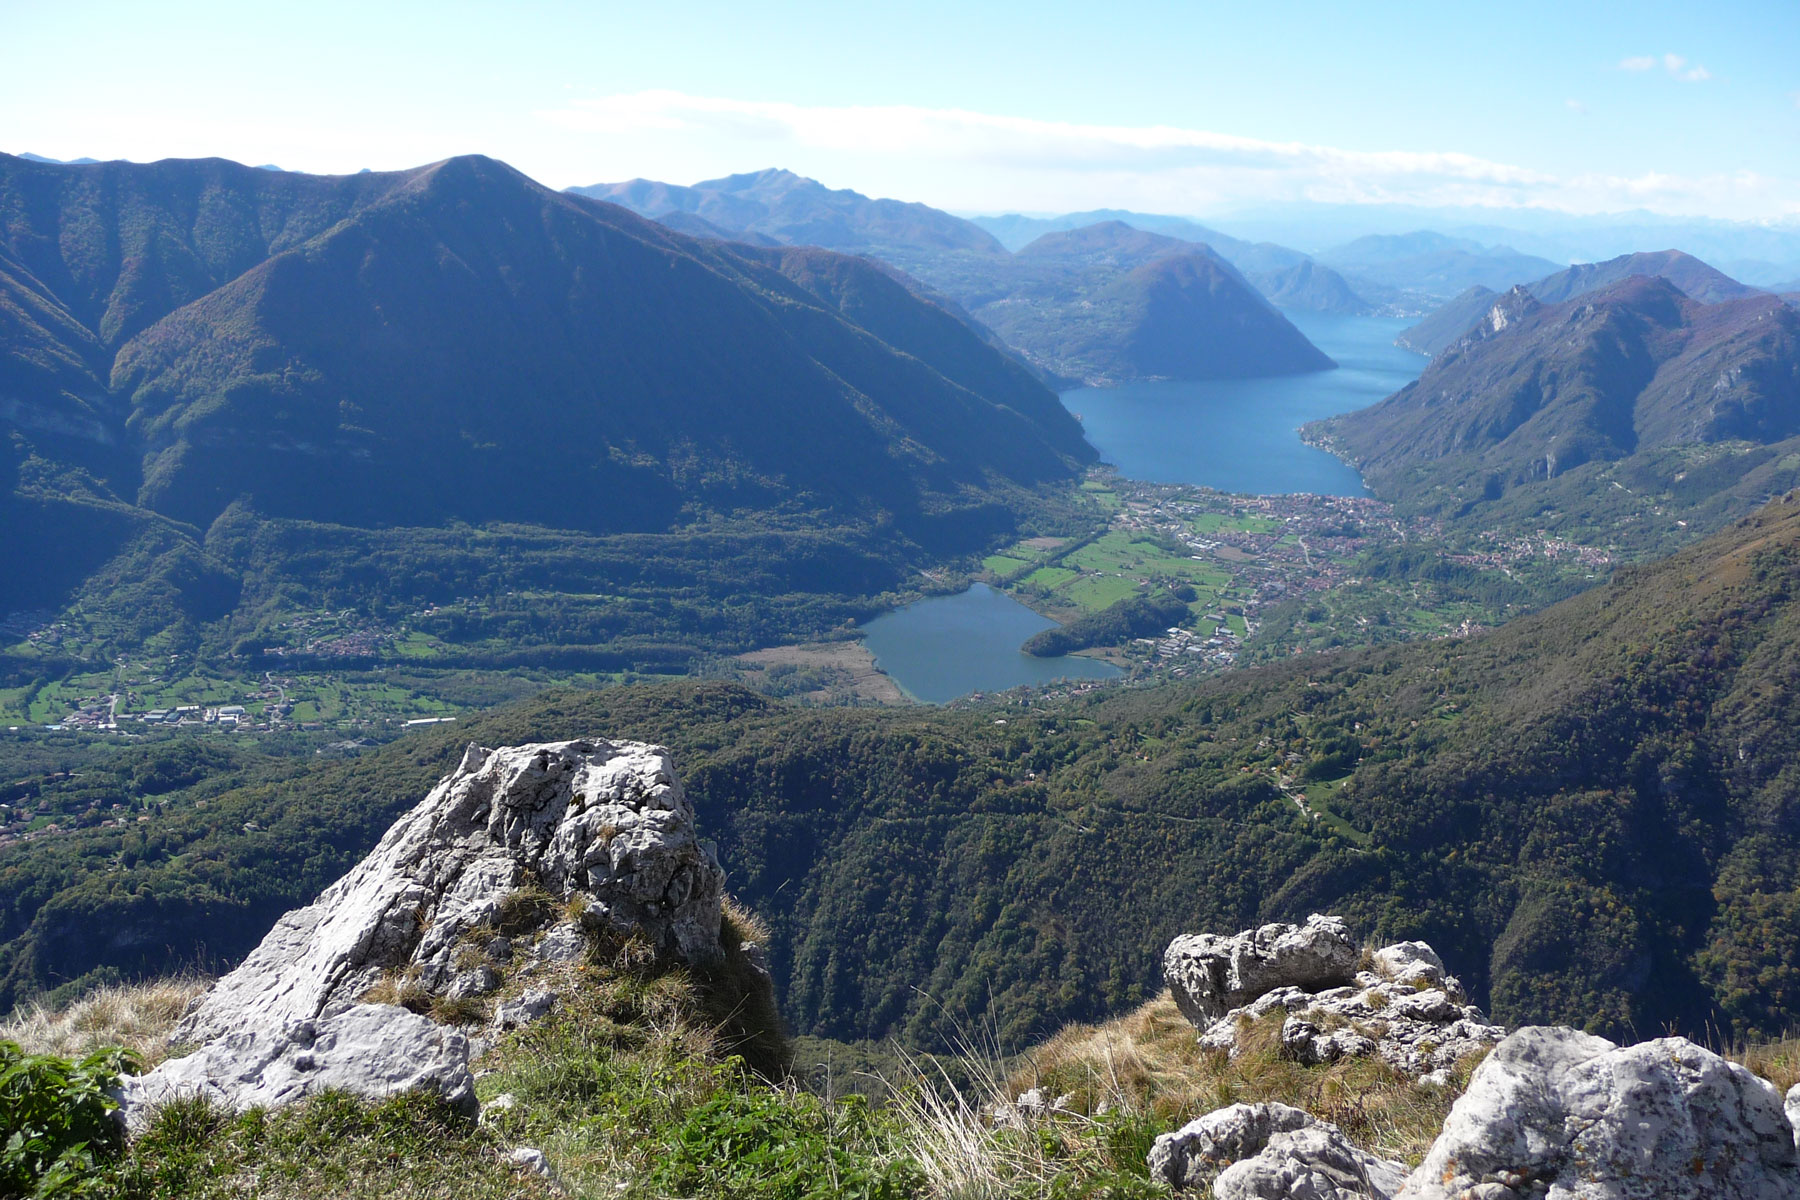 View of lake Lugano from Mount Grona